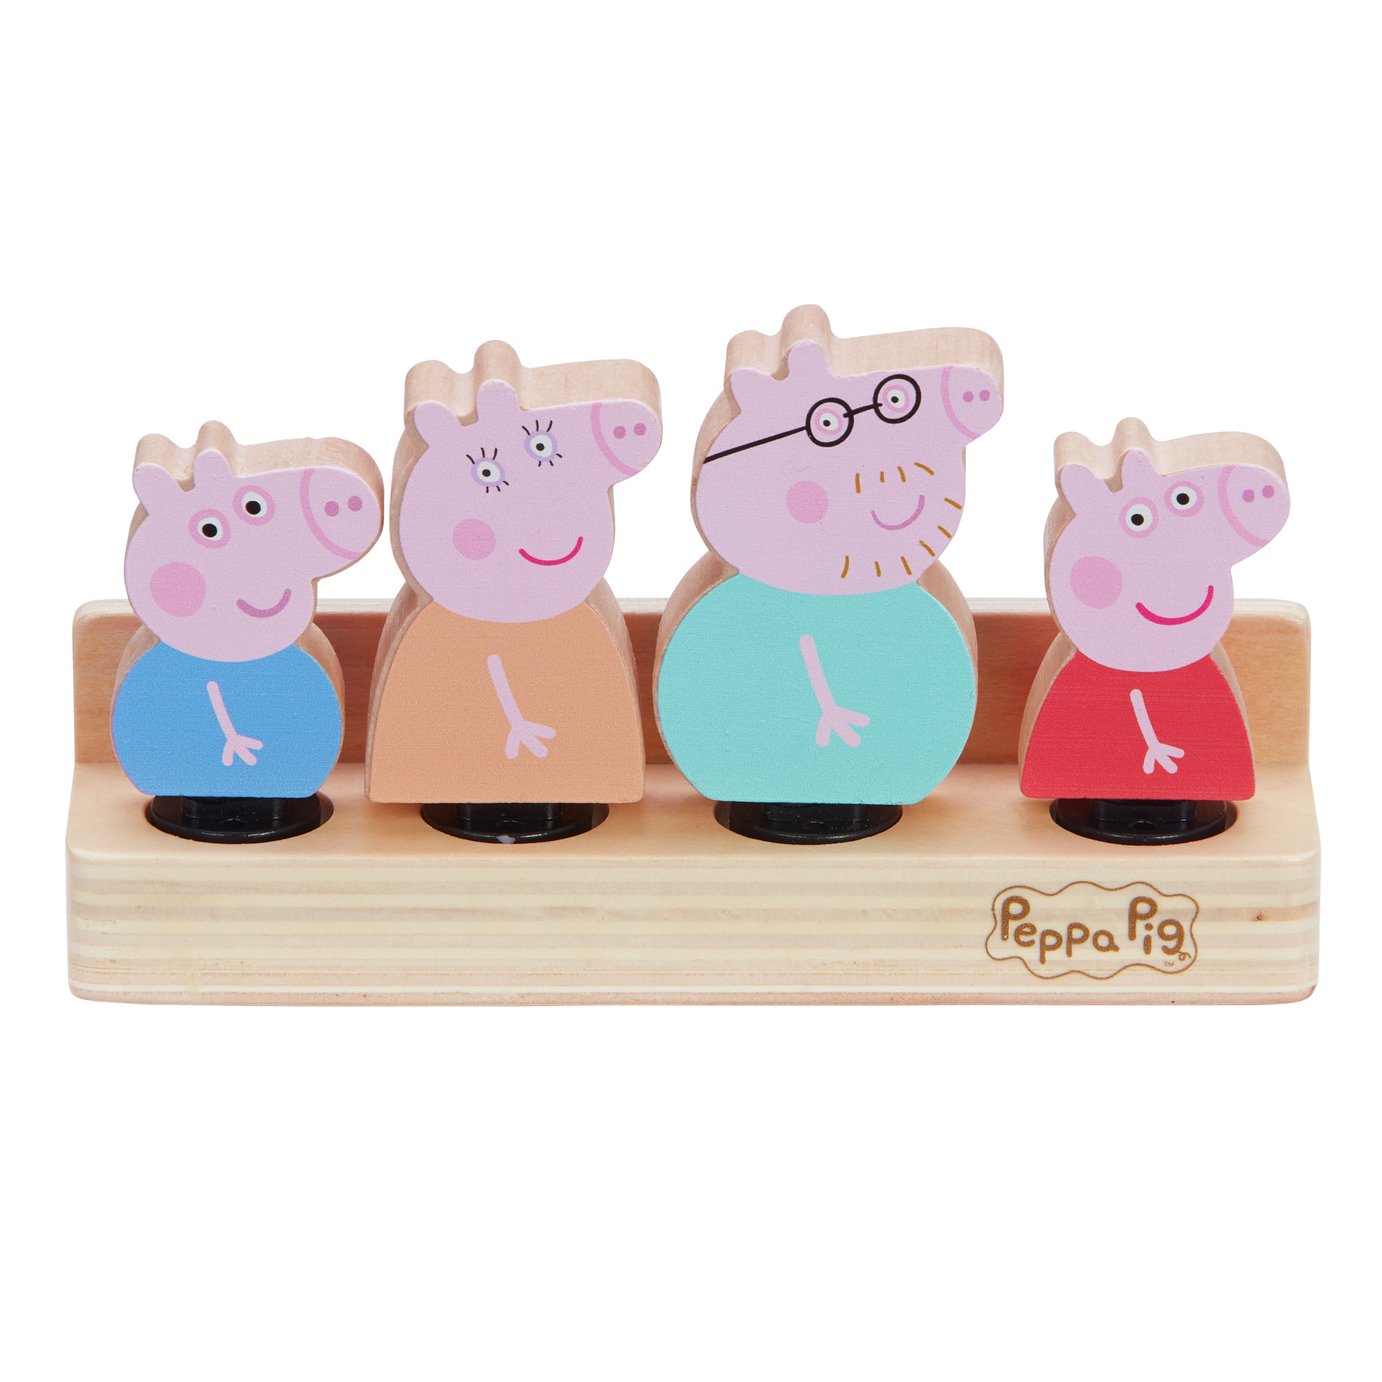 Peppa Pig Peppa's Wood Play Family Figure Pack review